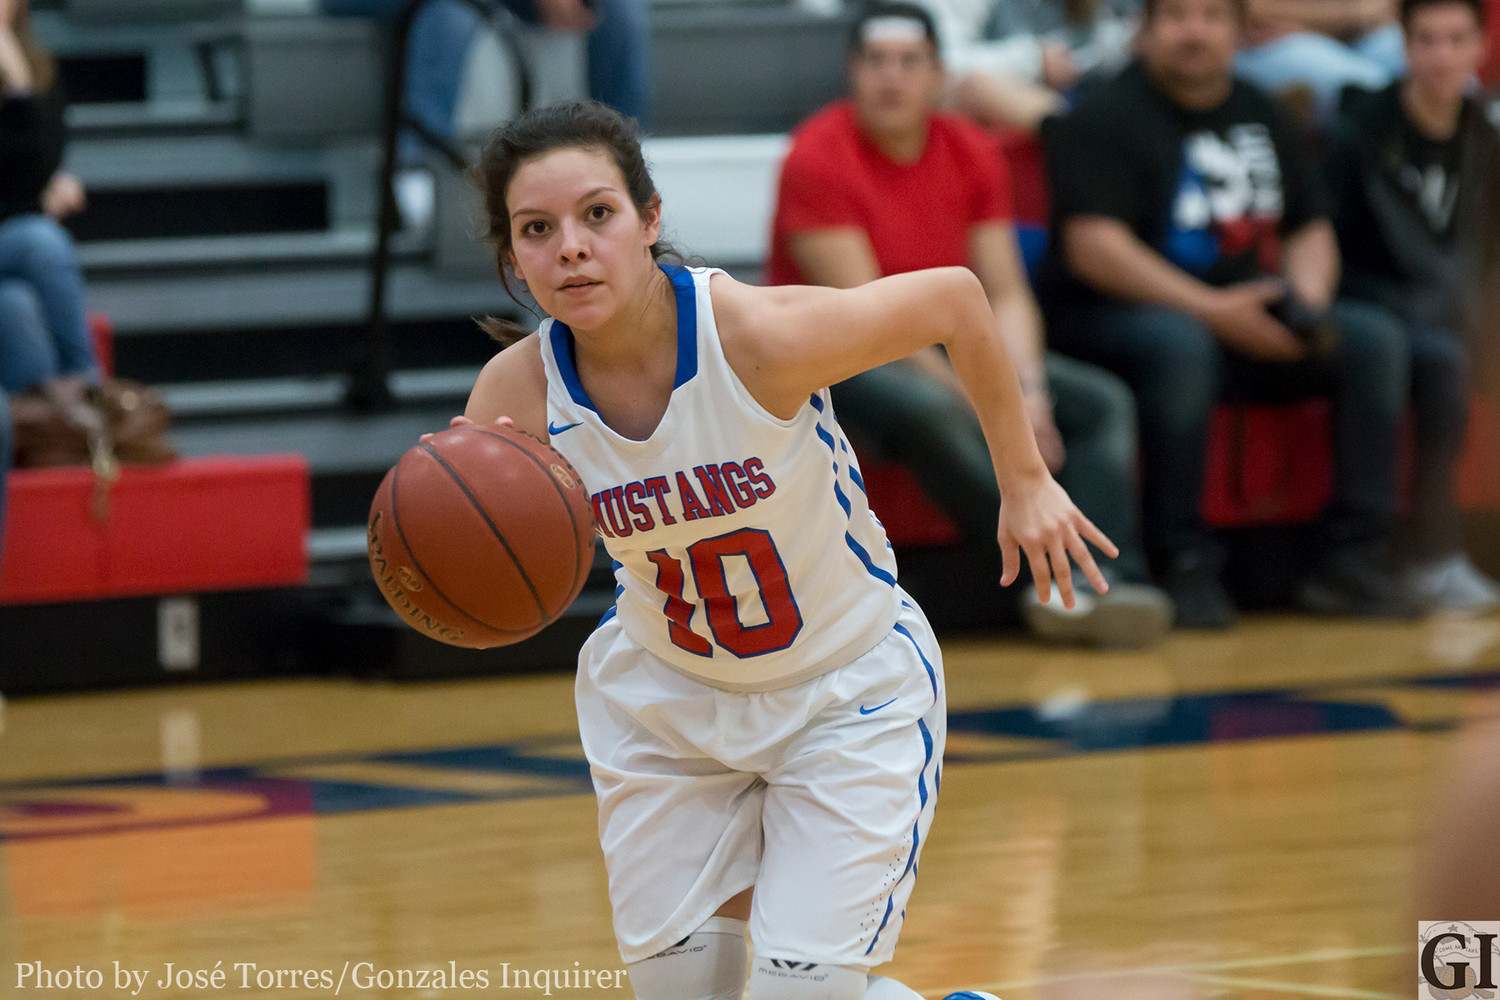 Maggie Mendez (10) drives to the basket.